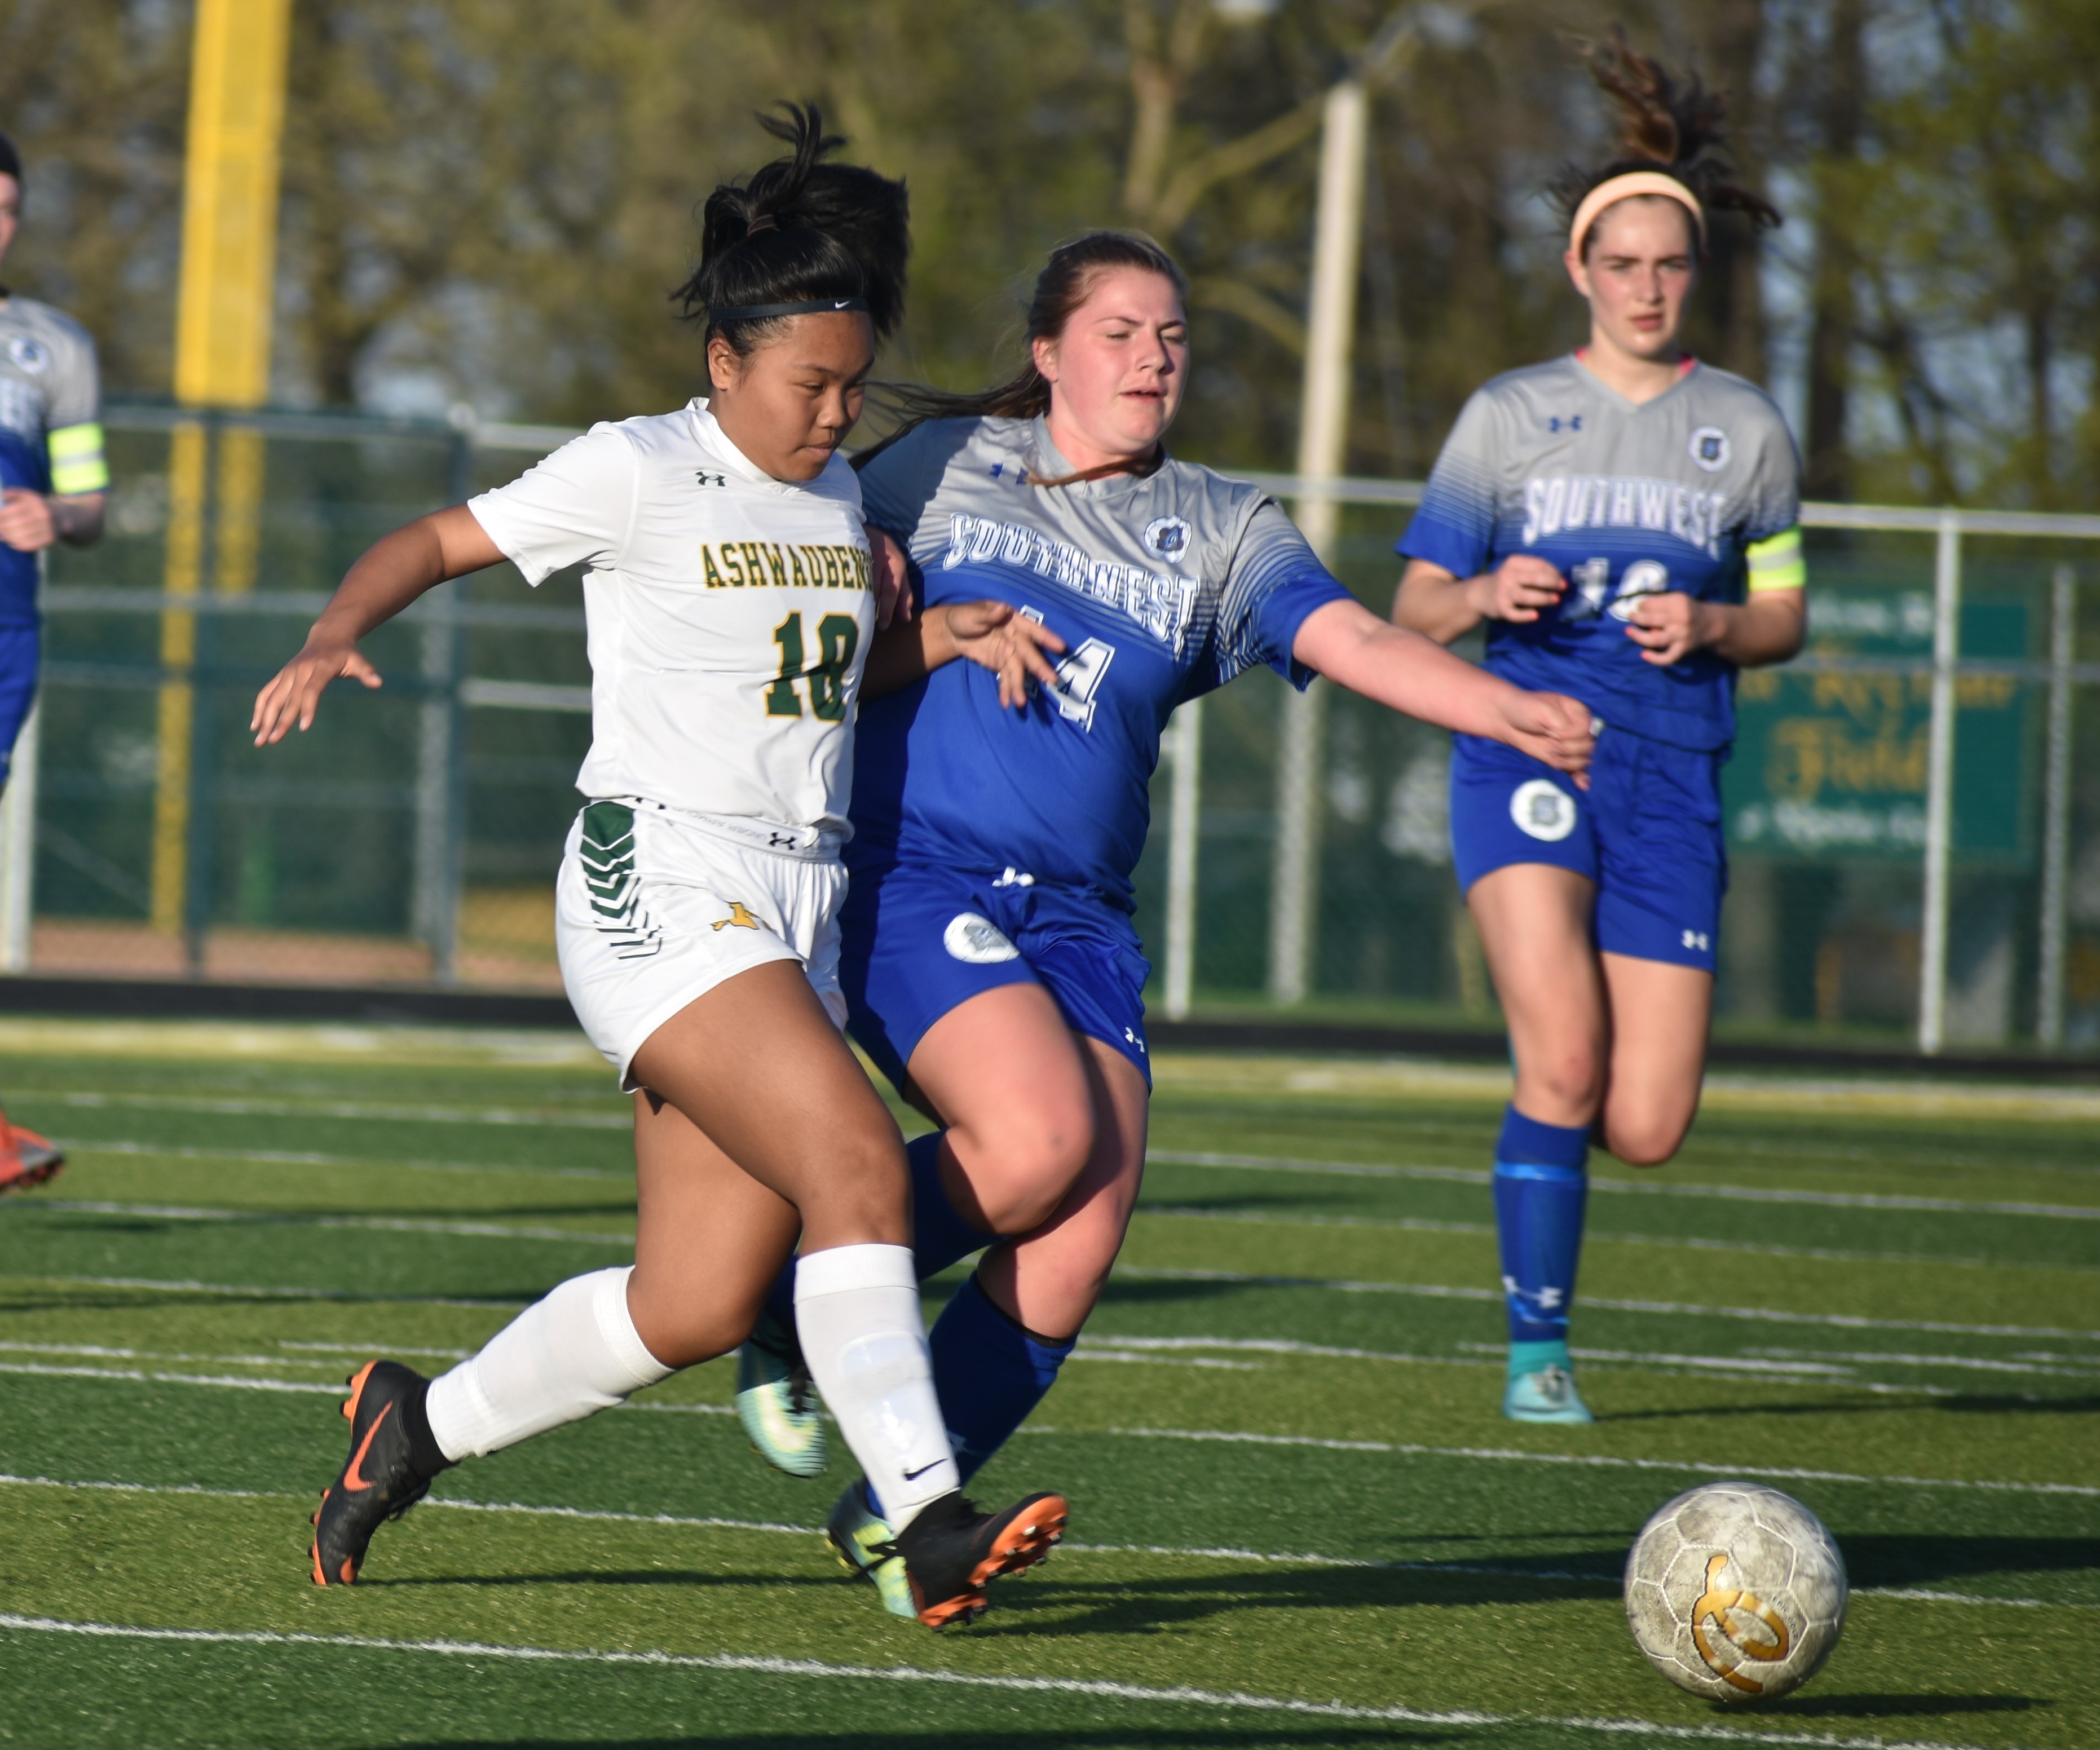 Jaguars and Trojans play to a draw in soccer